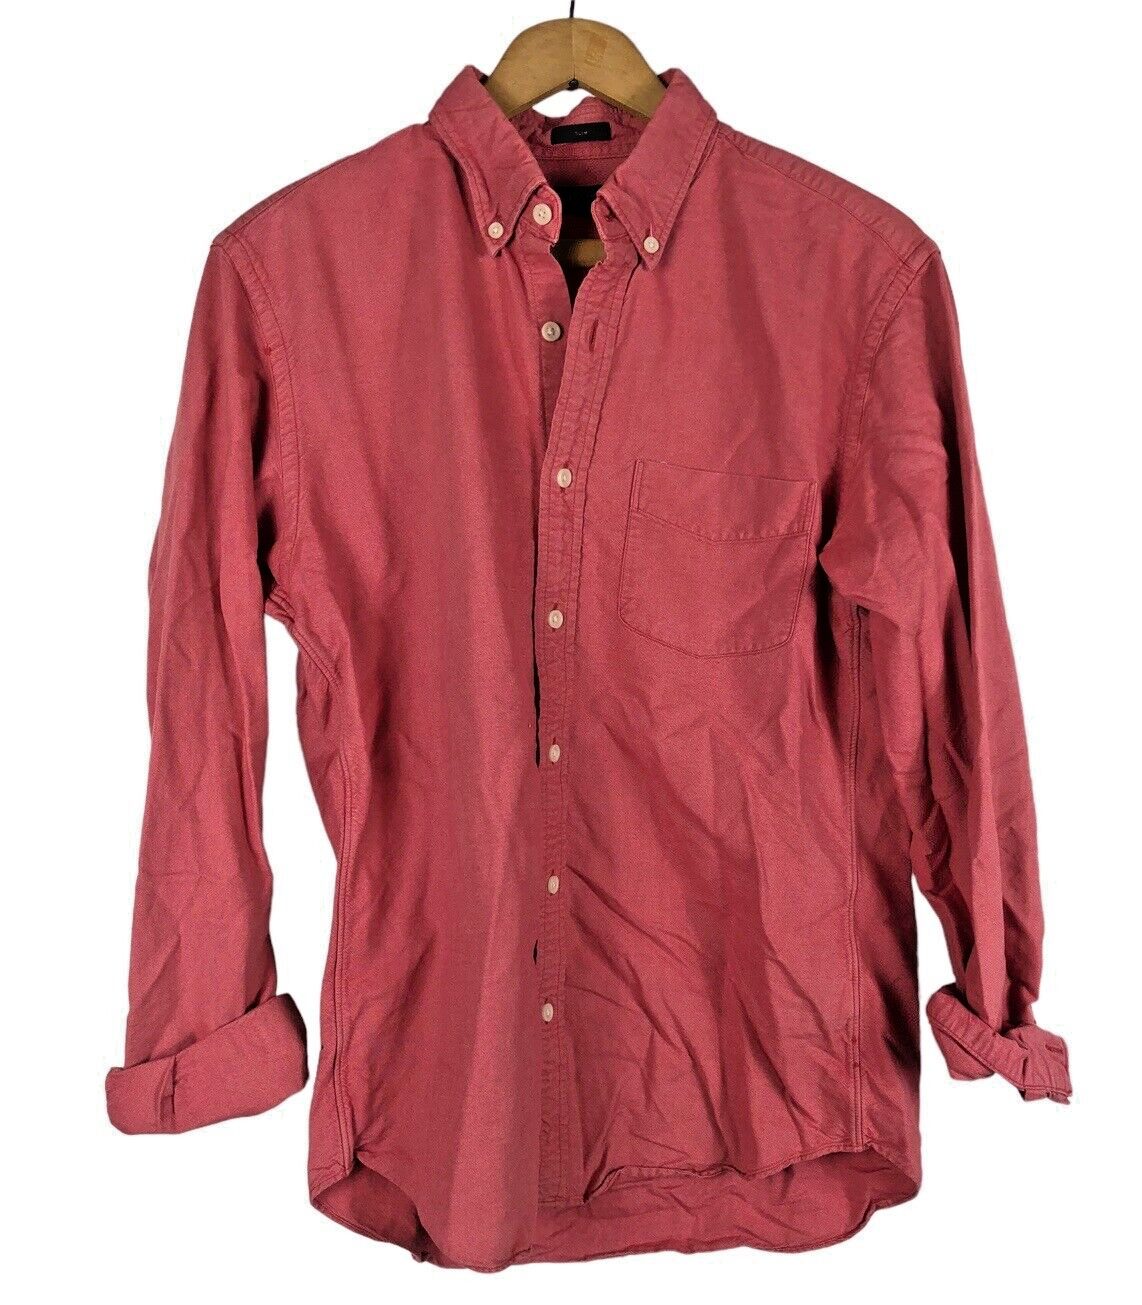 Primary image for J Crew Slim Oxford Shirt Medium Mens Pink Washed Red Button Down Cotton Chambray